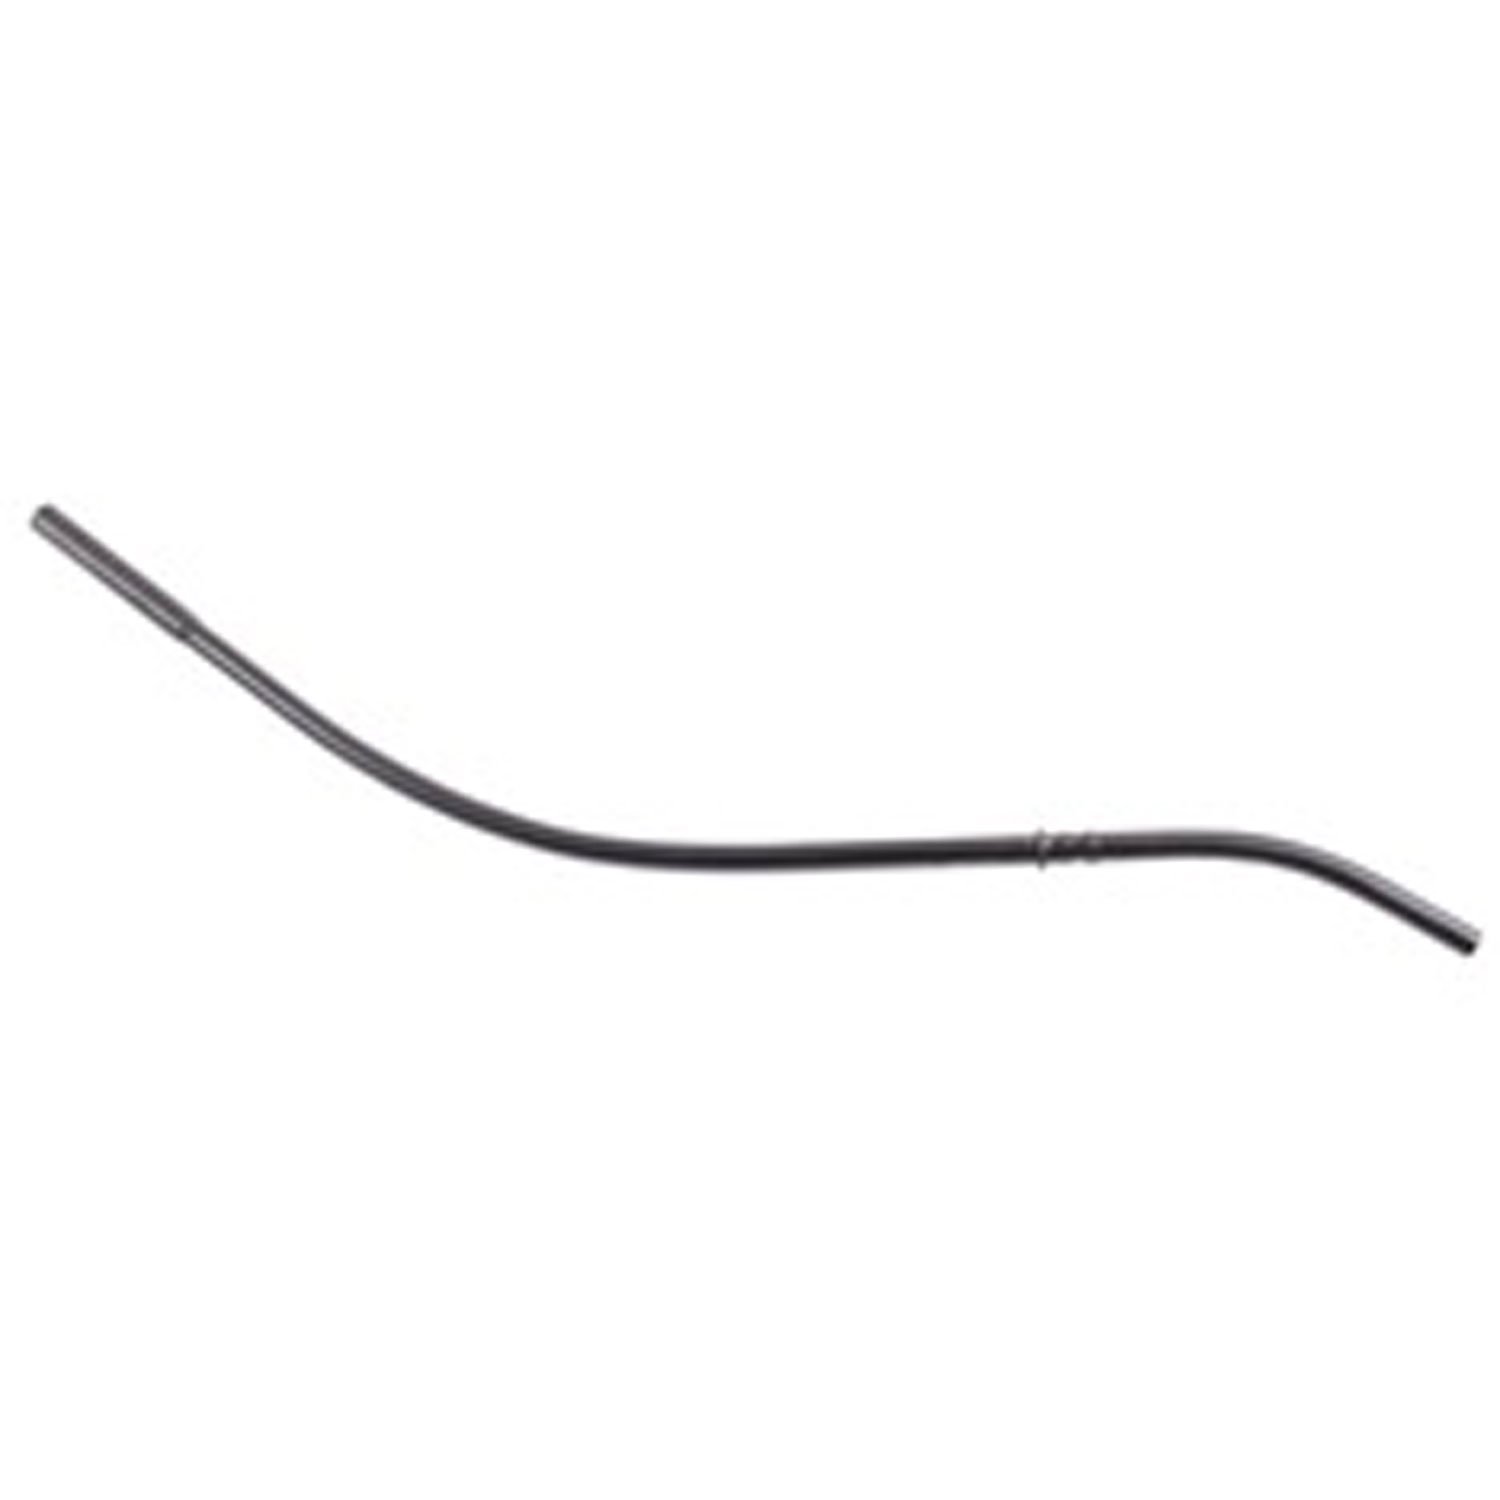 Oil Dipstick Tube for Select 1966-1991 AMC/Jeep Models with 290, 304, 343, 360, 390 or 401 Engines